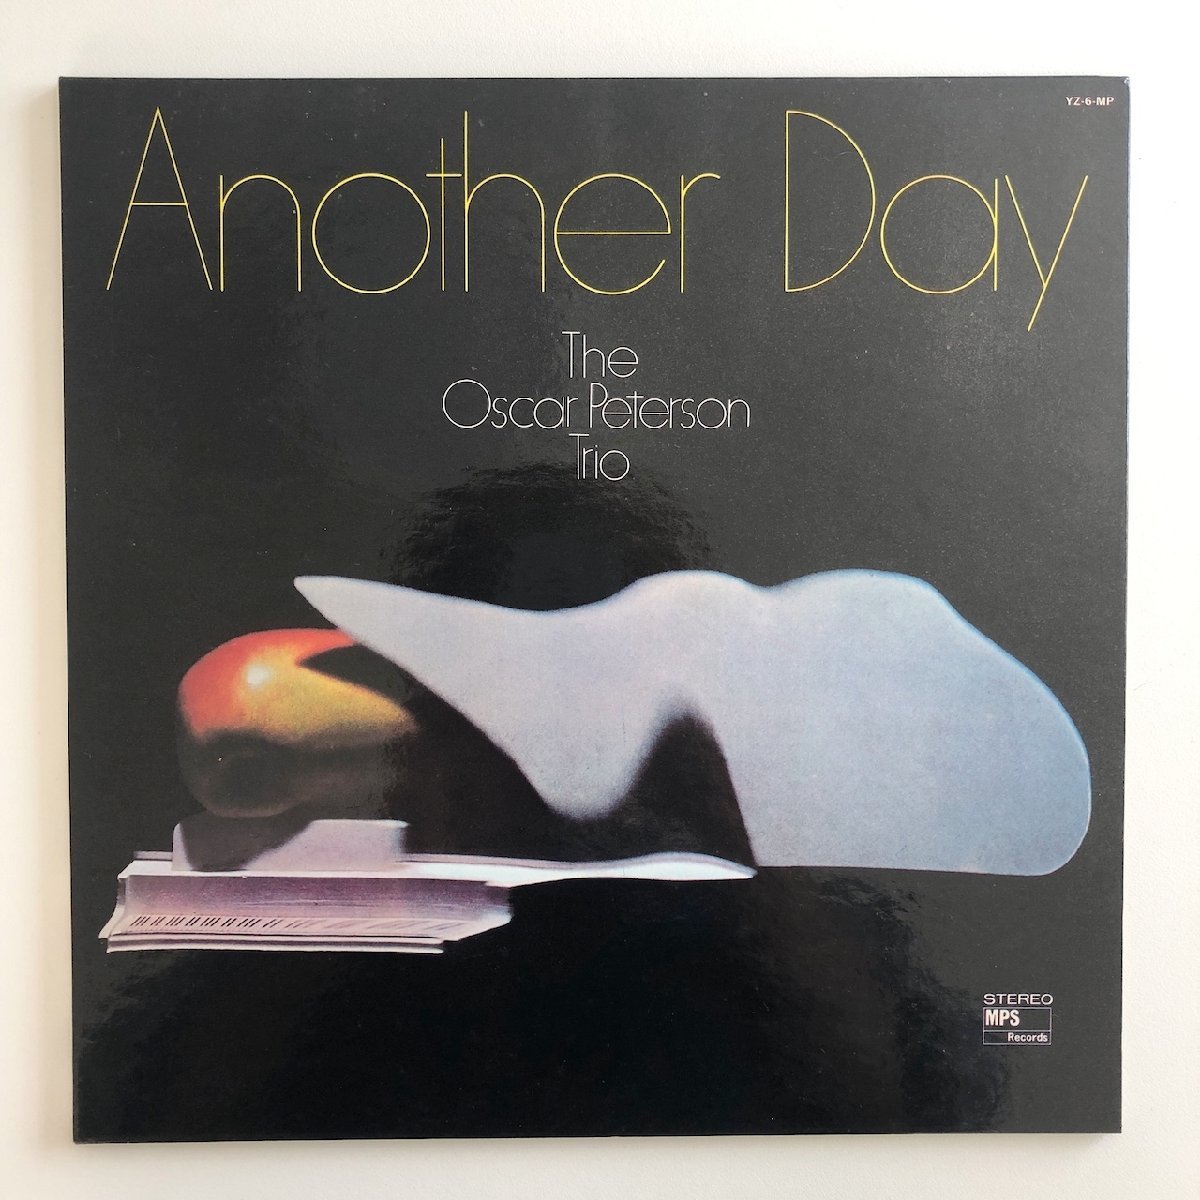 LP/ THE OSCAR PETERSON TRIO / ANOTHER DAY / オスカー・ピーターソン / 国内盤 MPS YZ-6-MP 30816_画像1